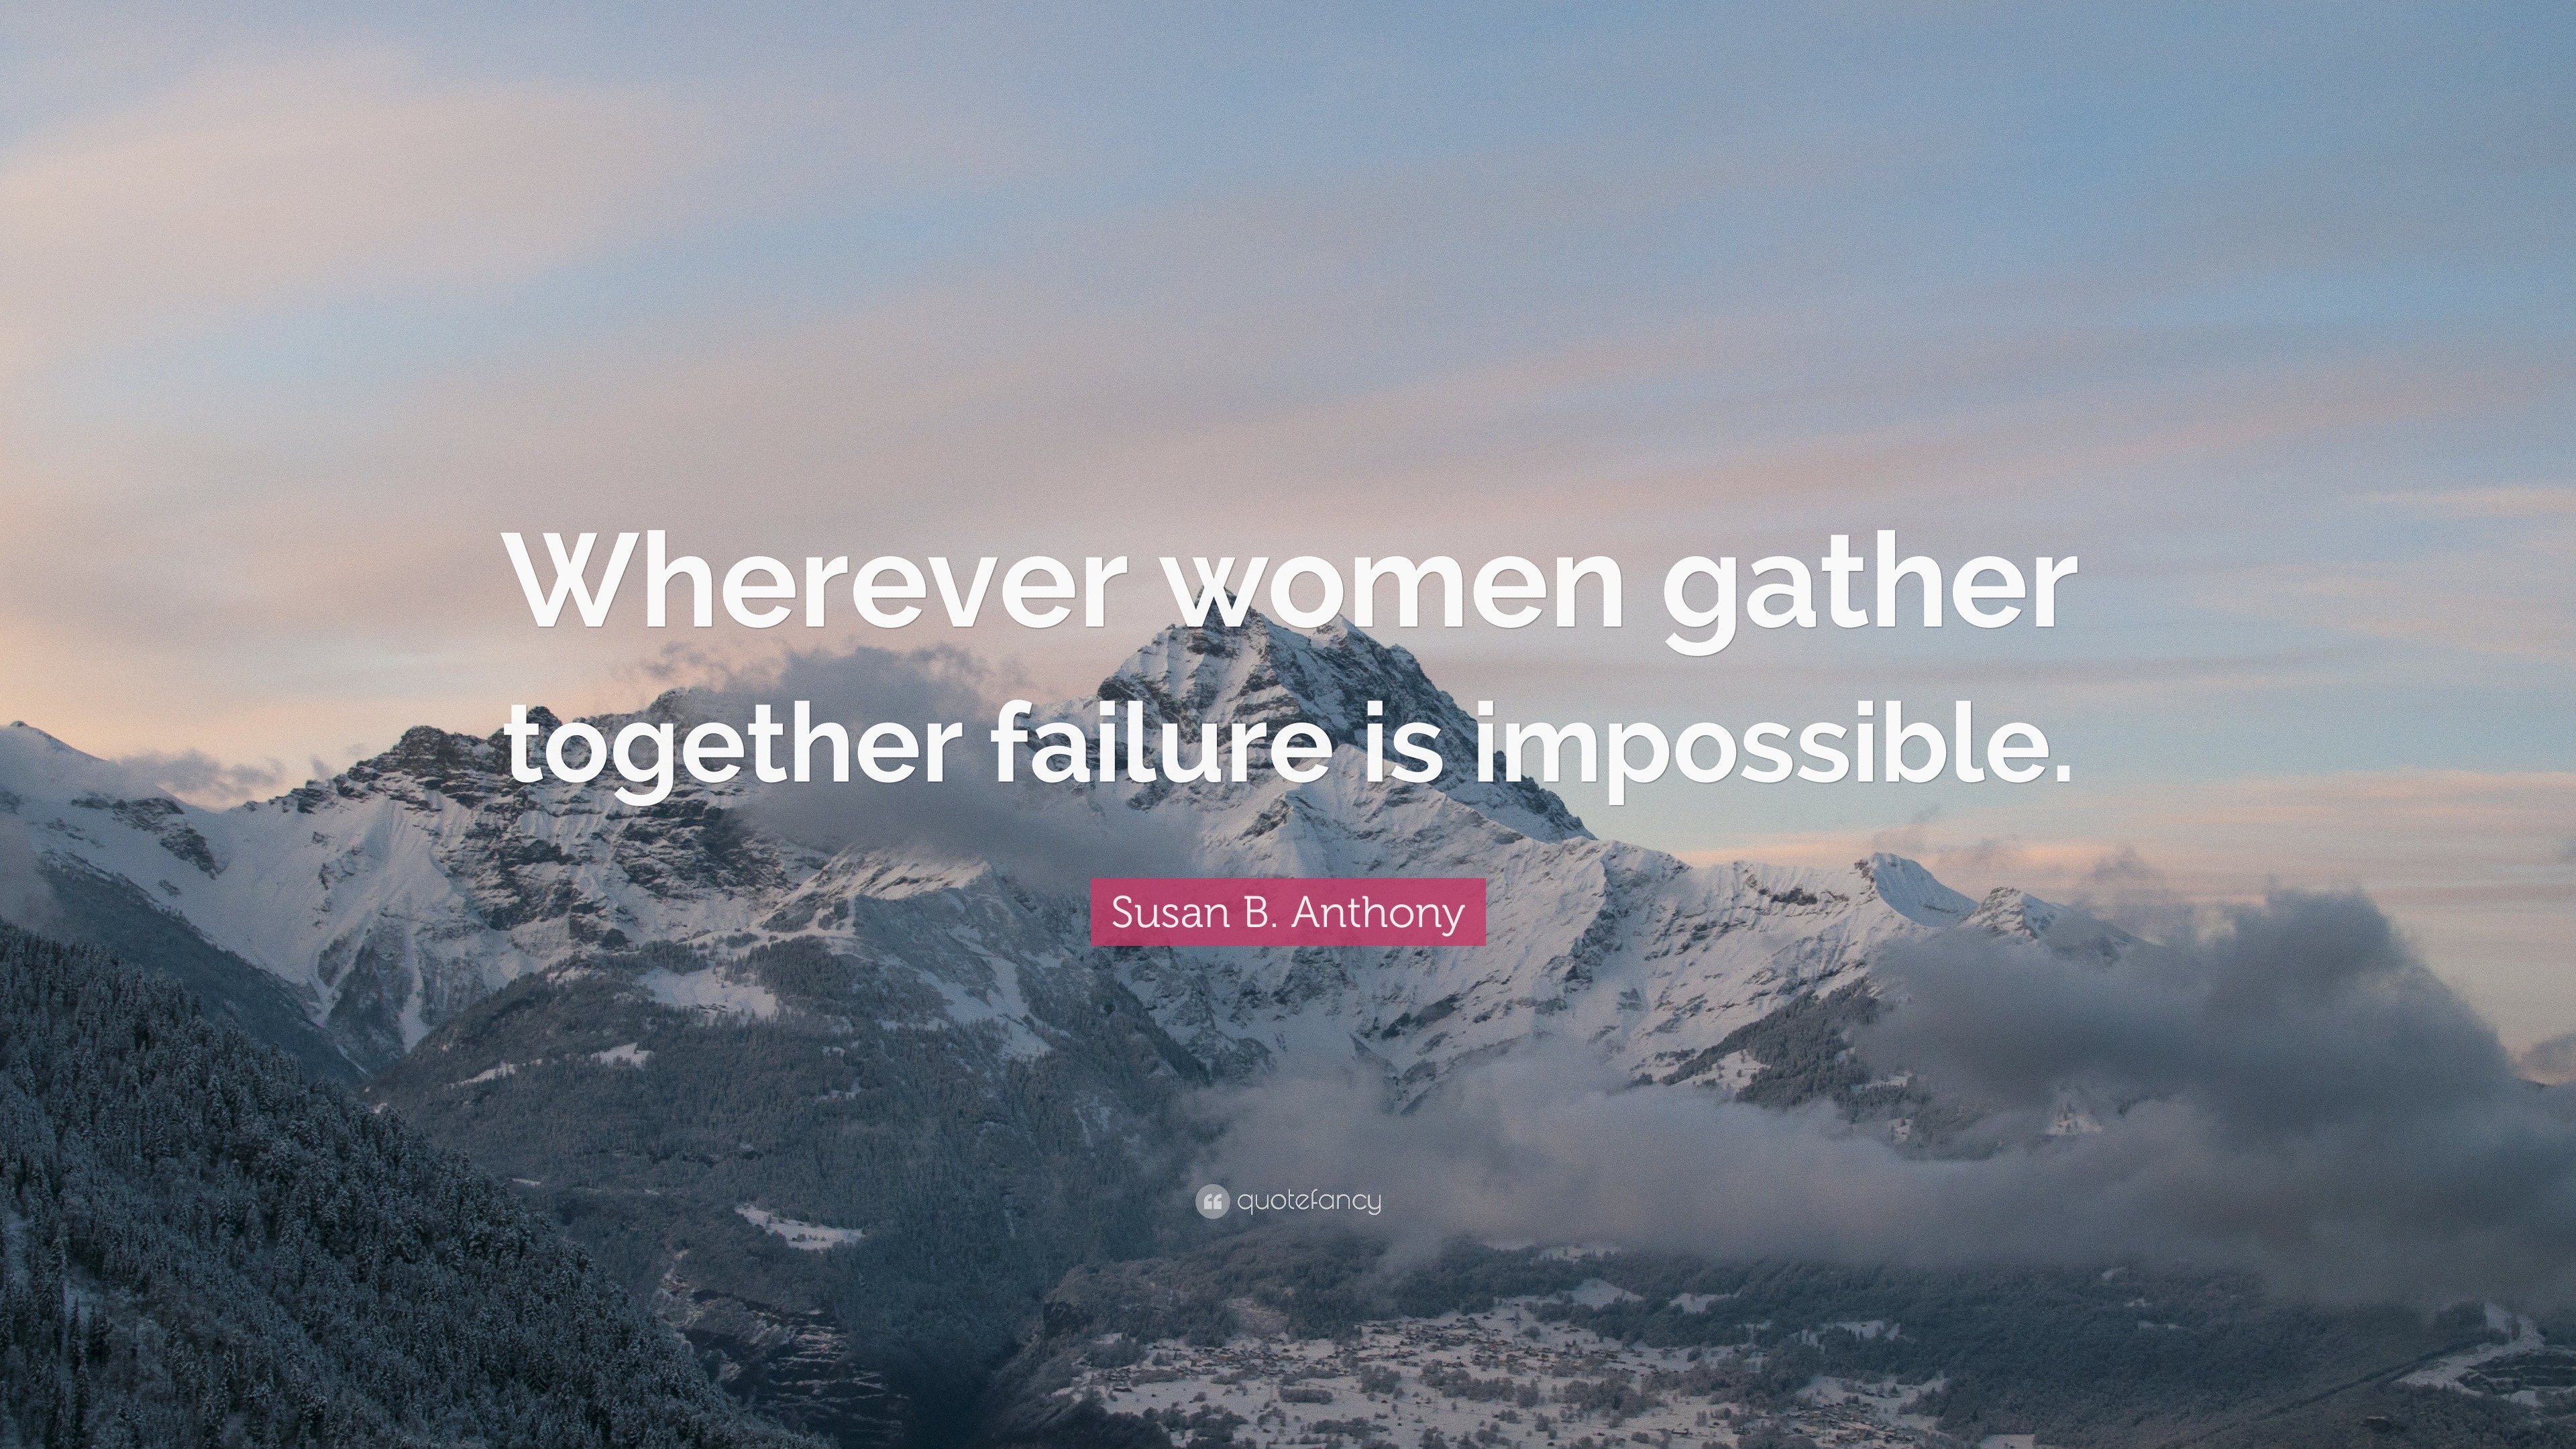 Susan B. Anthony Quote: “Wherever women gather together failure is impossible ...